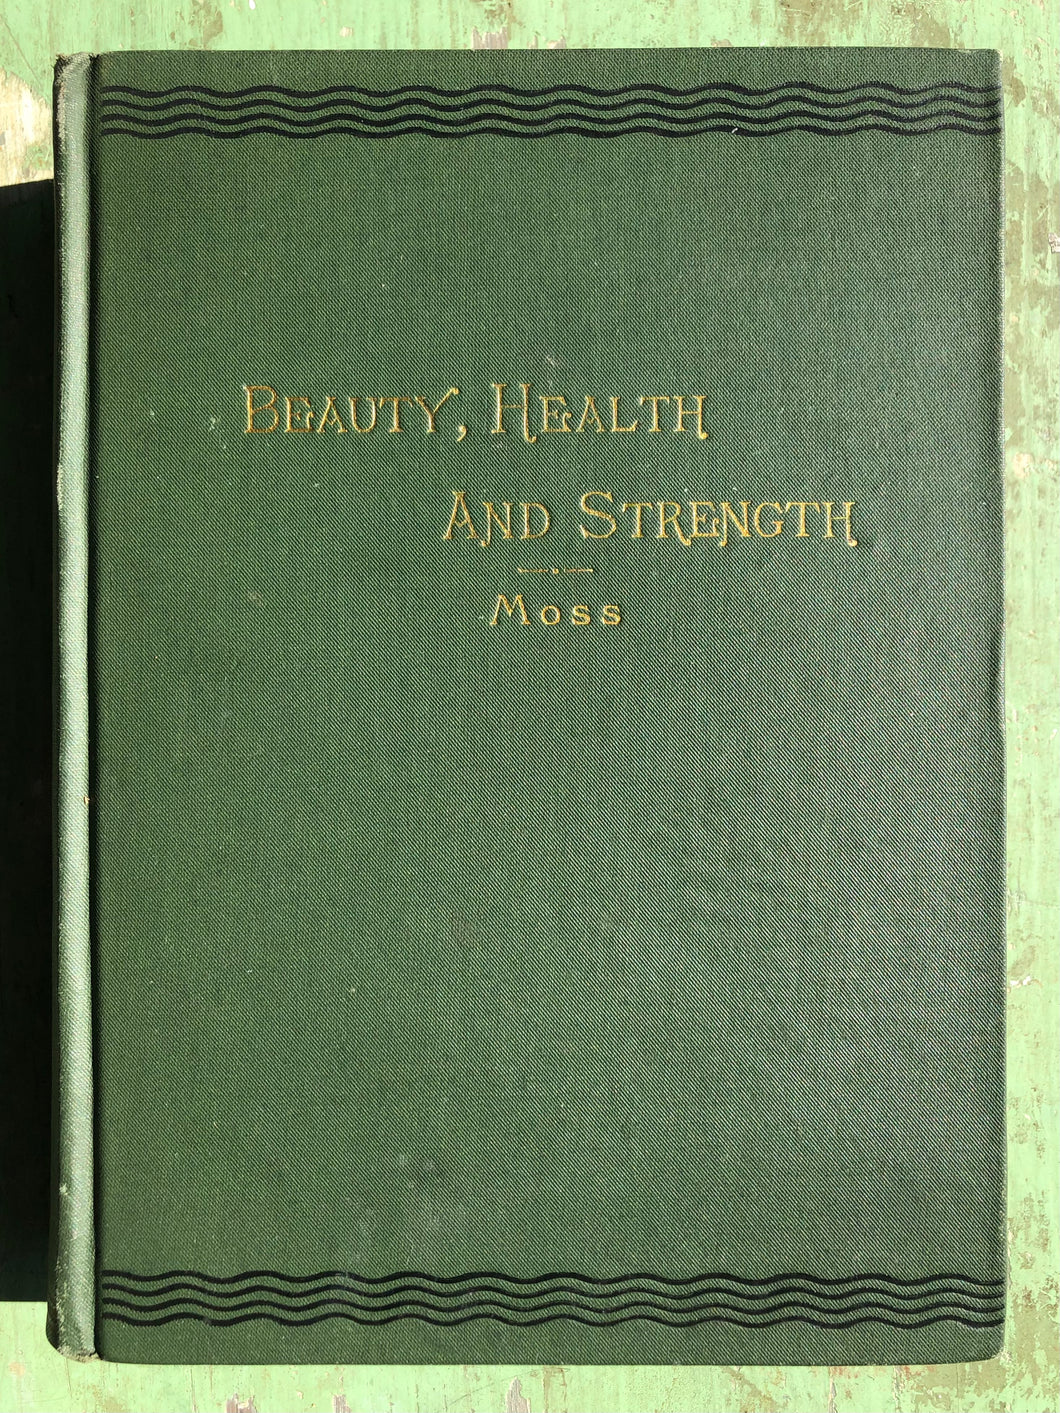 Beauty, Health and Strength for Every Woman. By Oscar B. Moss